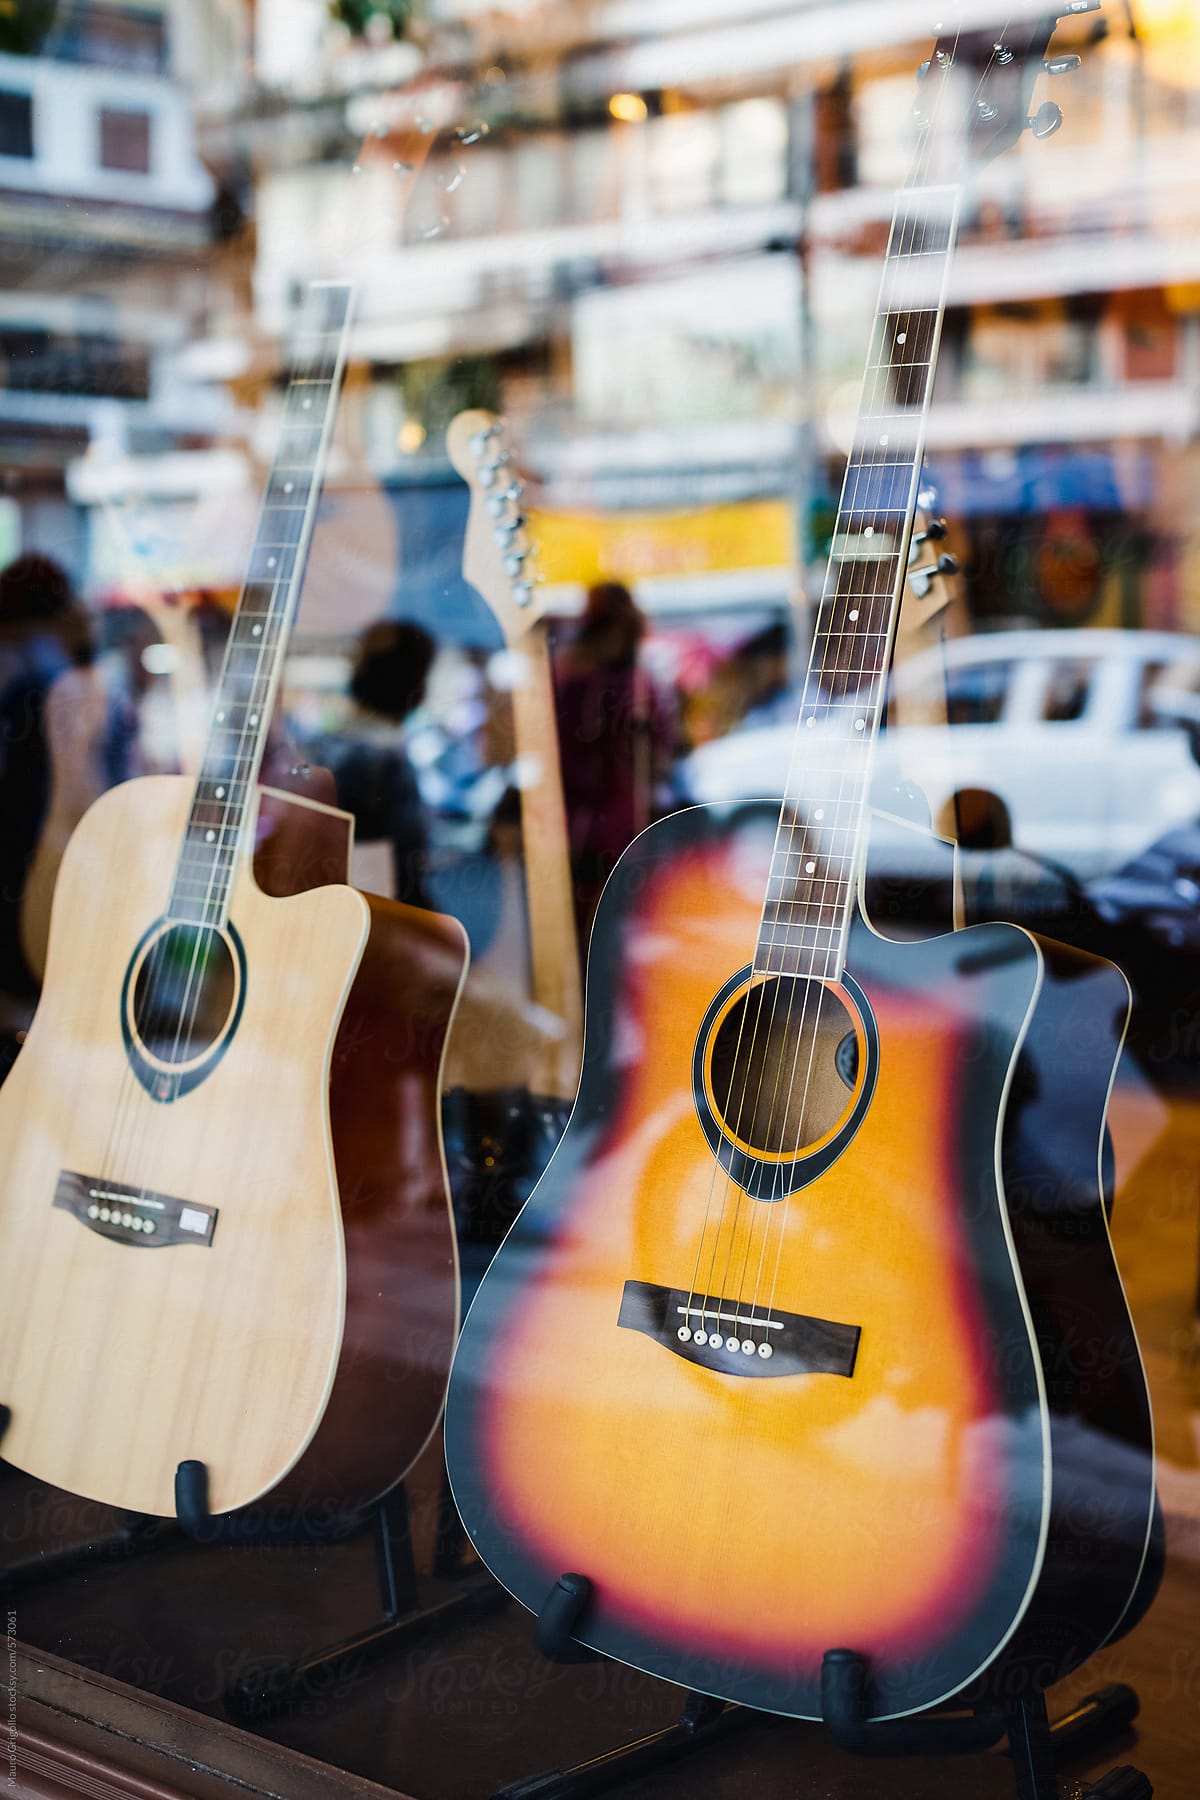 Guitars in a musical instrument shop